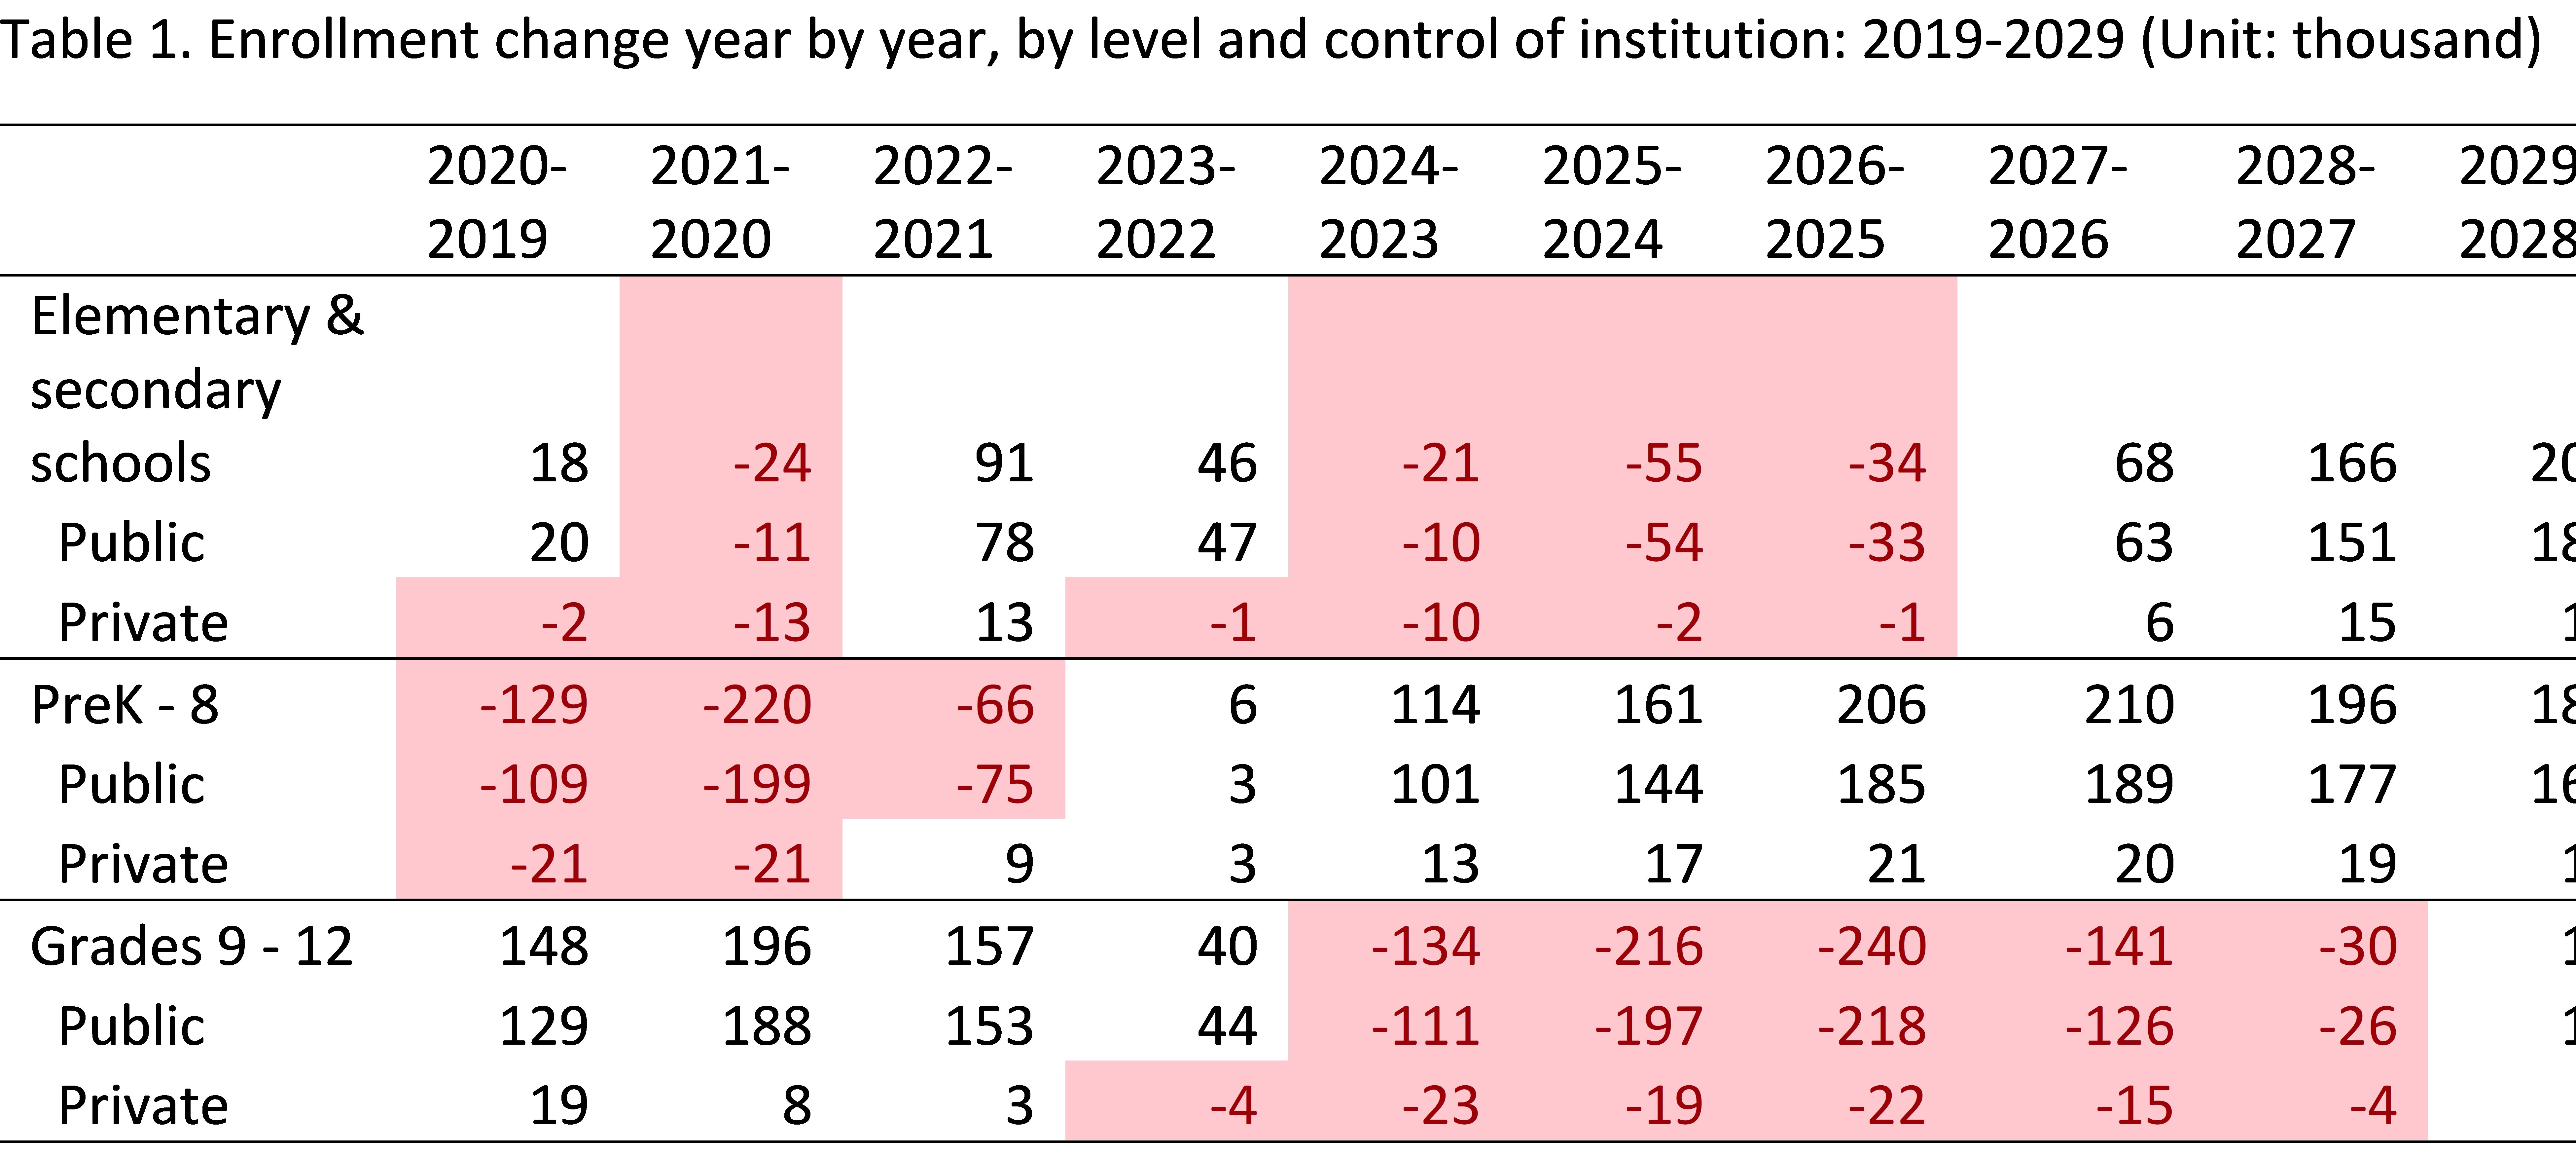 a table showing enrollment change year by year, by level and control of institution 